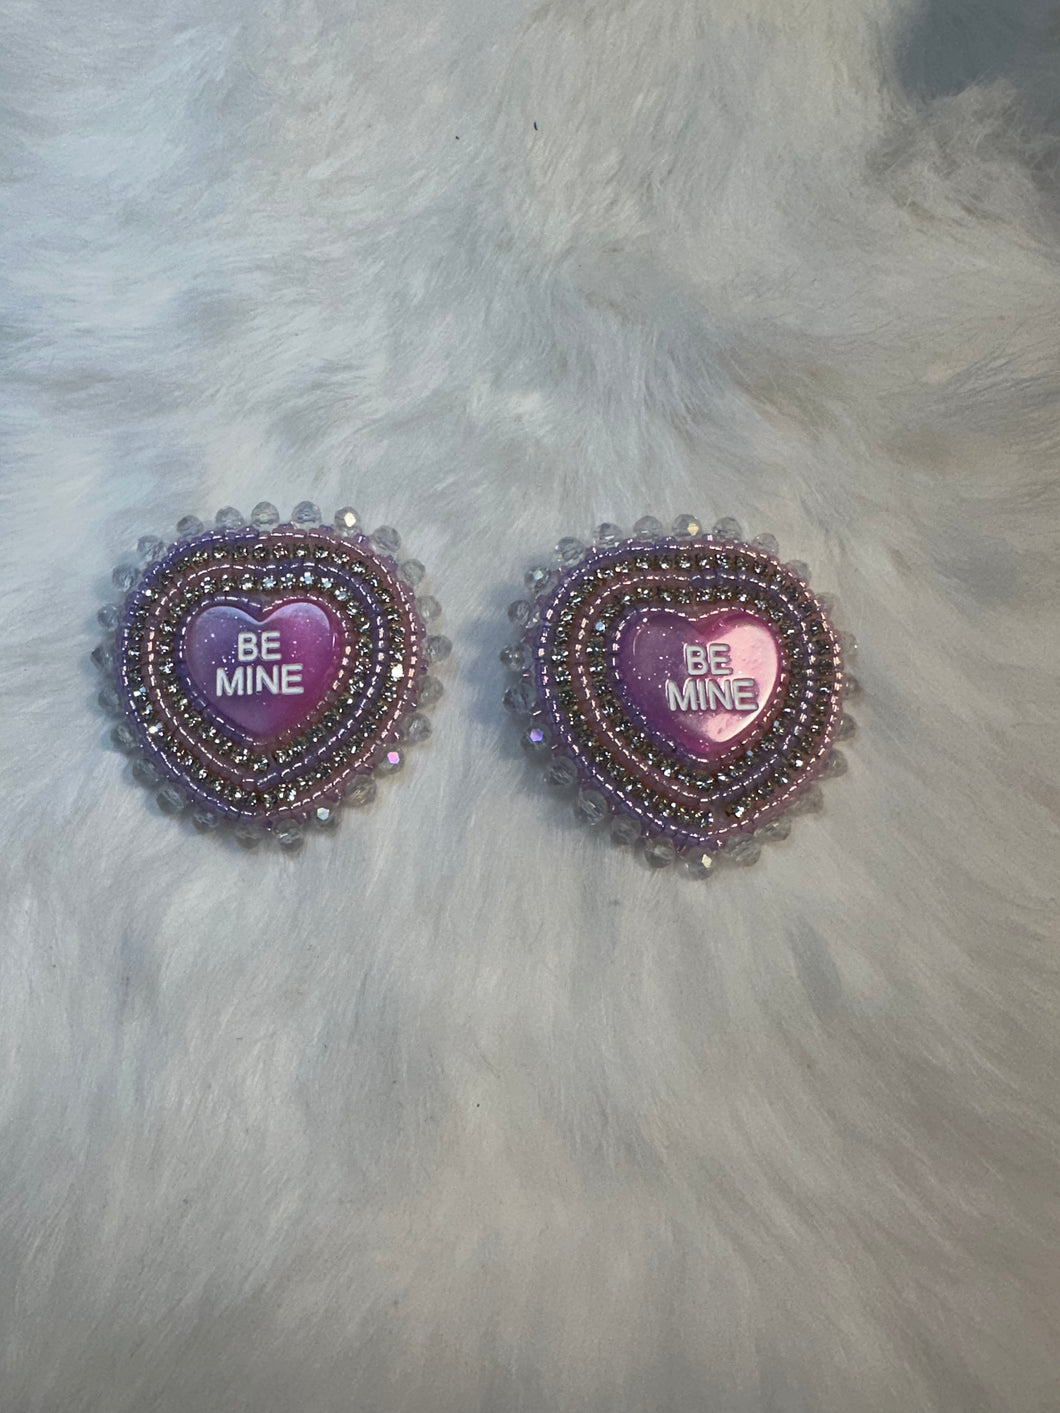 Be mine pink and purple earrings